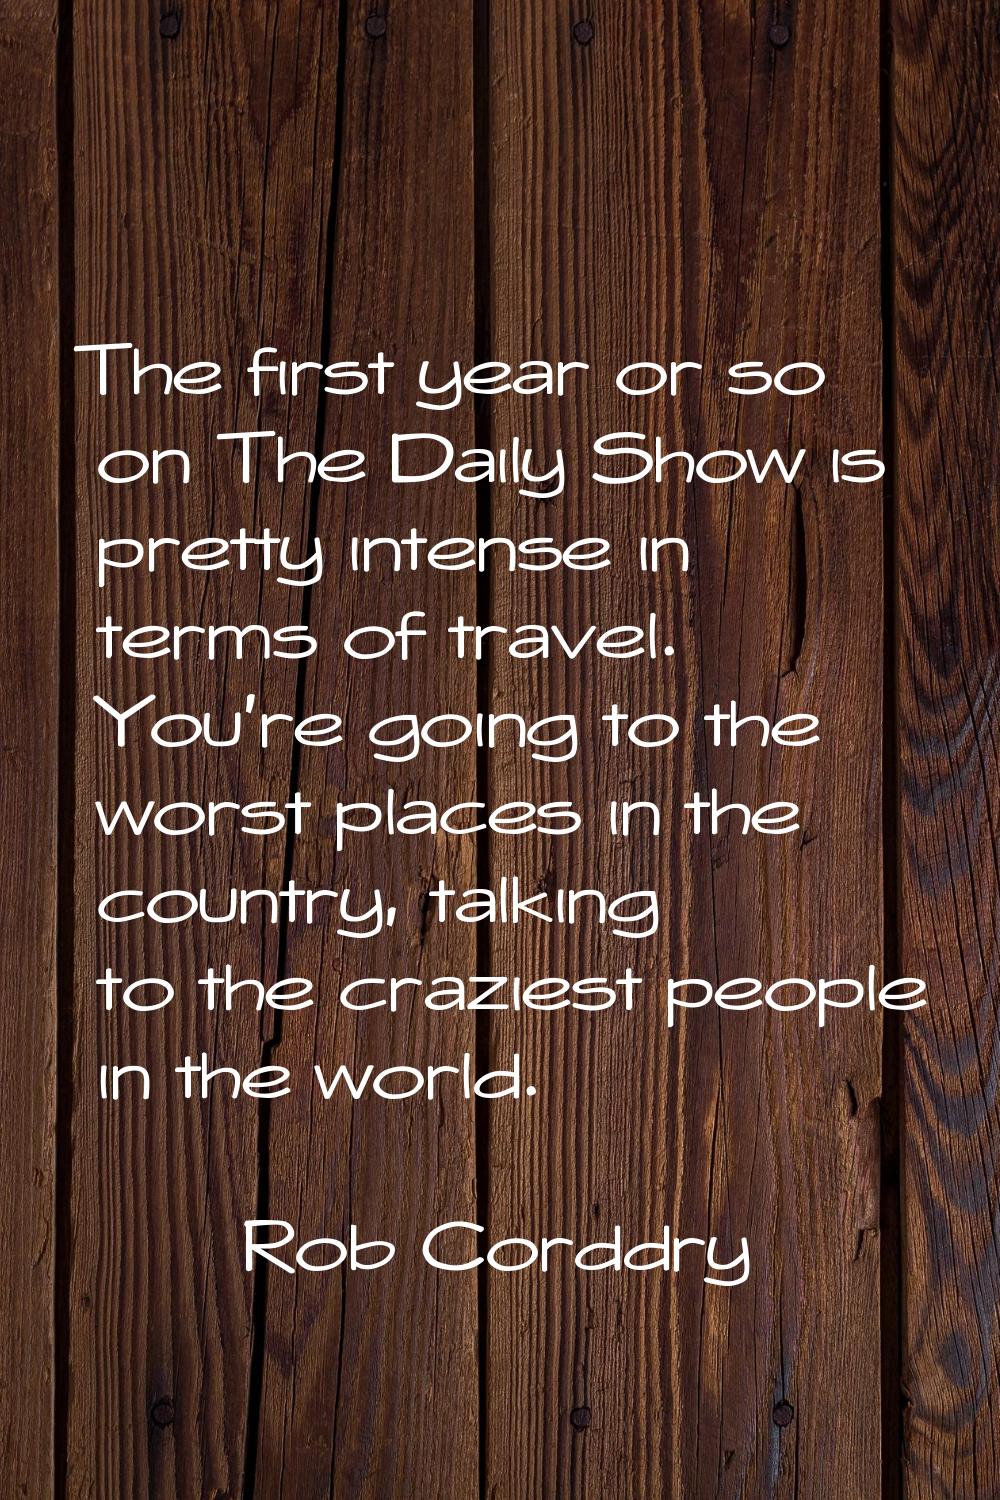 The first year or so on The Daily Show is pretty intense in terms of travel. You're going to the wo